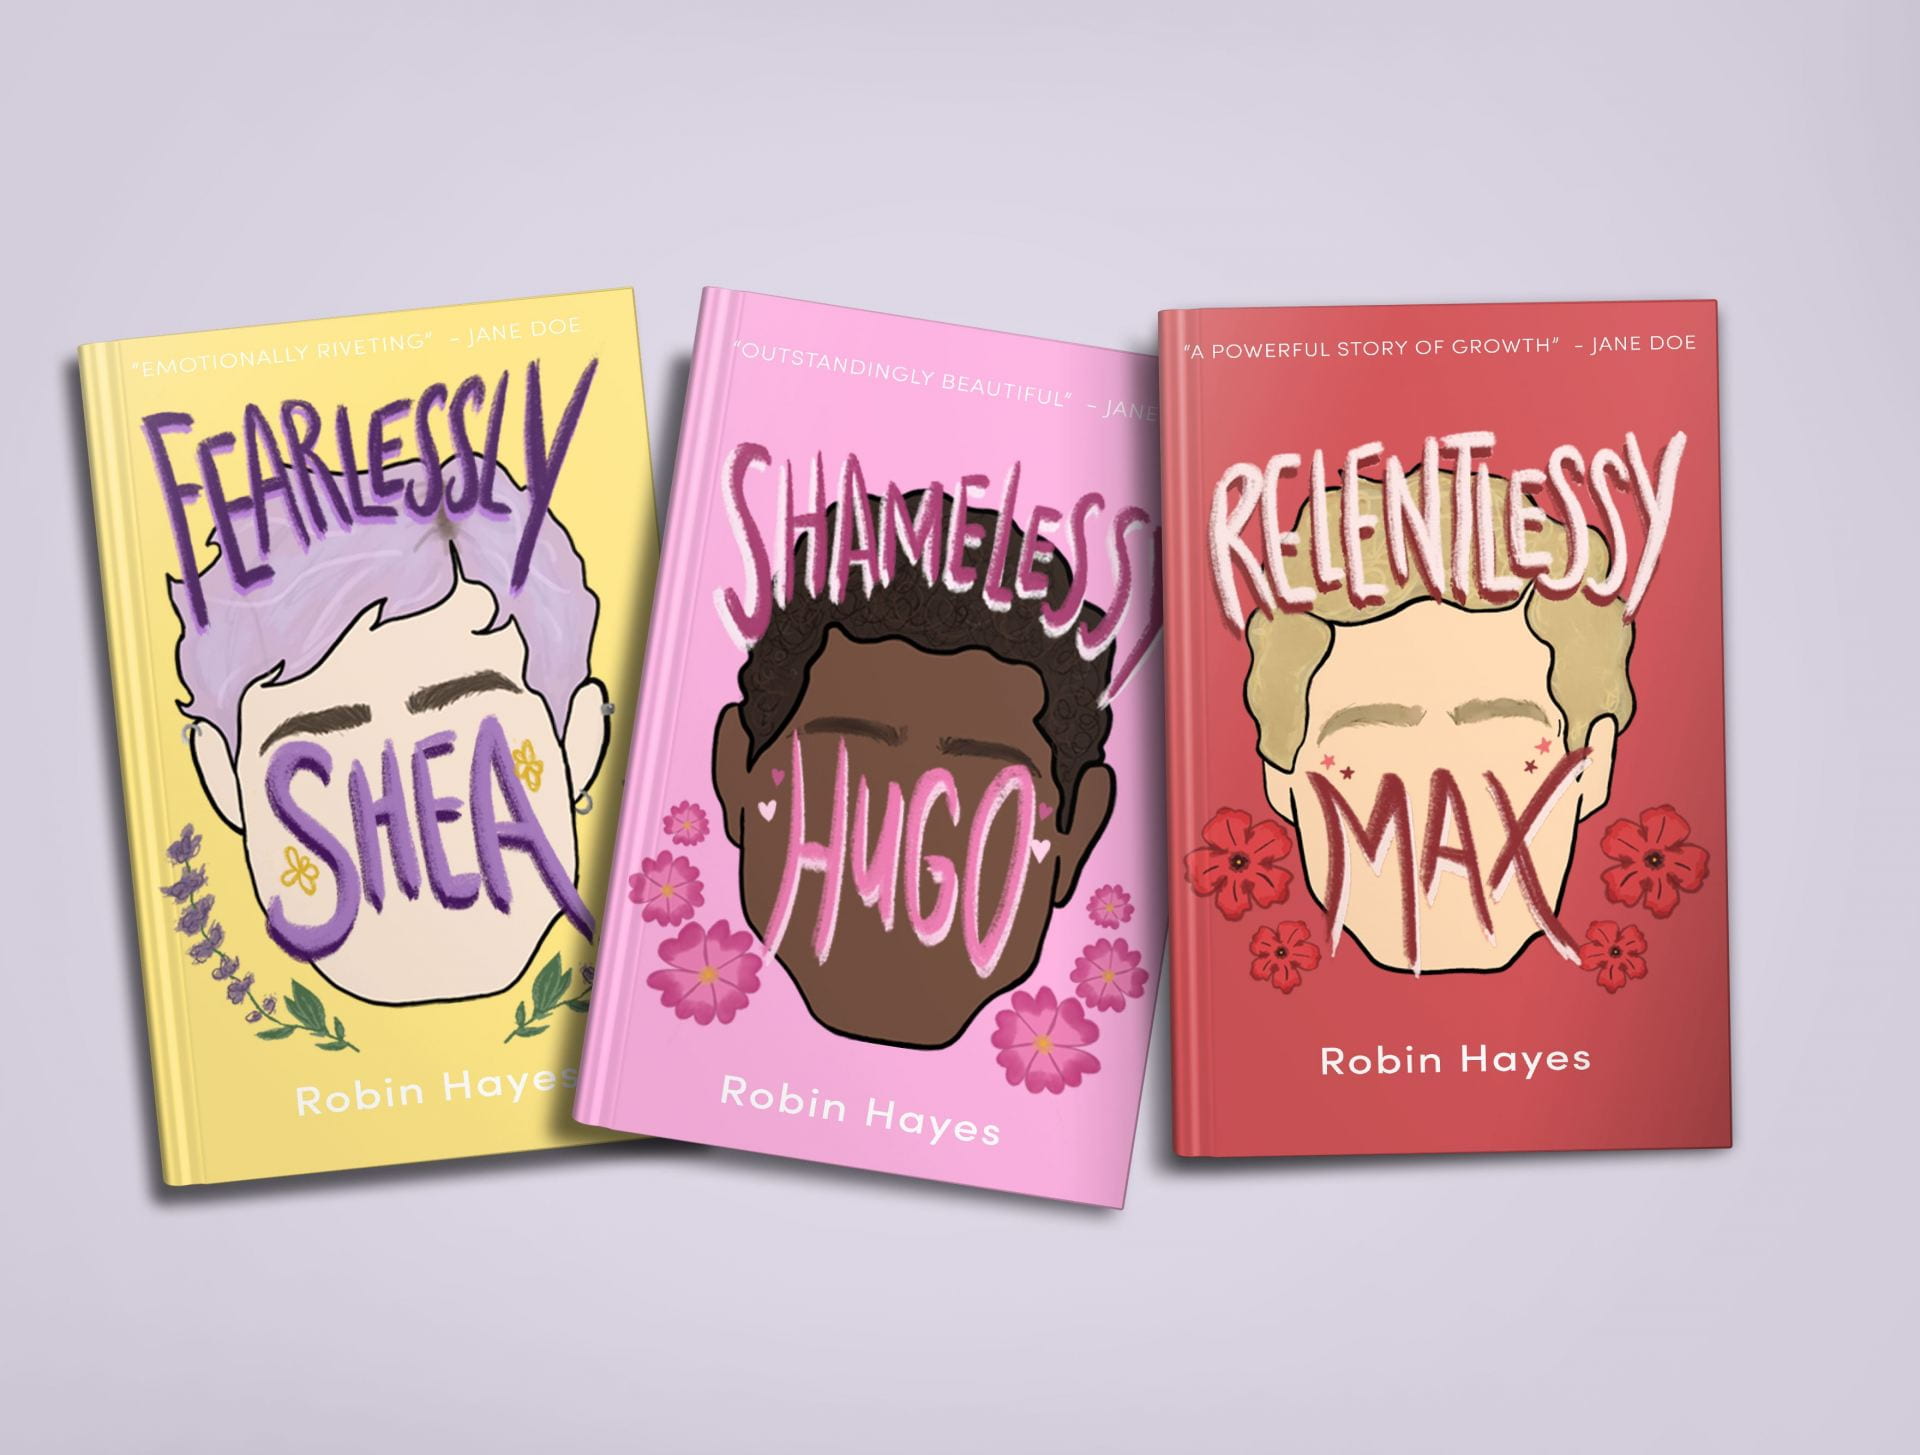 Yellow, pink and red Book cover designs.